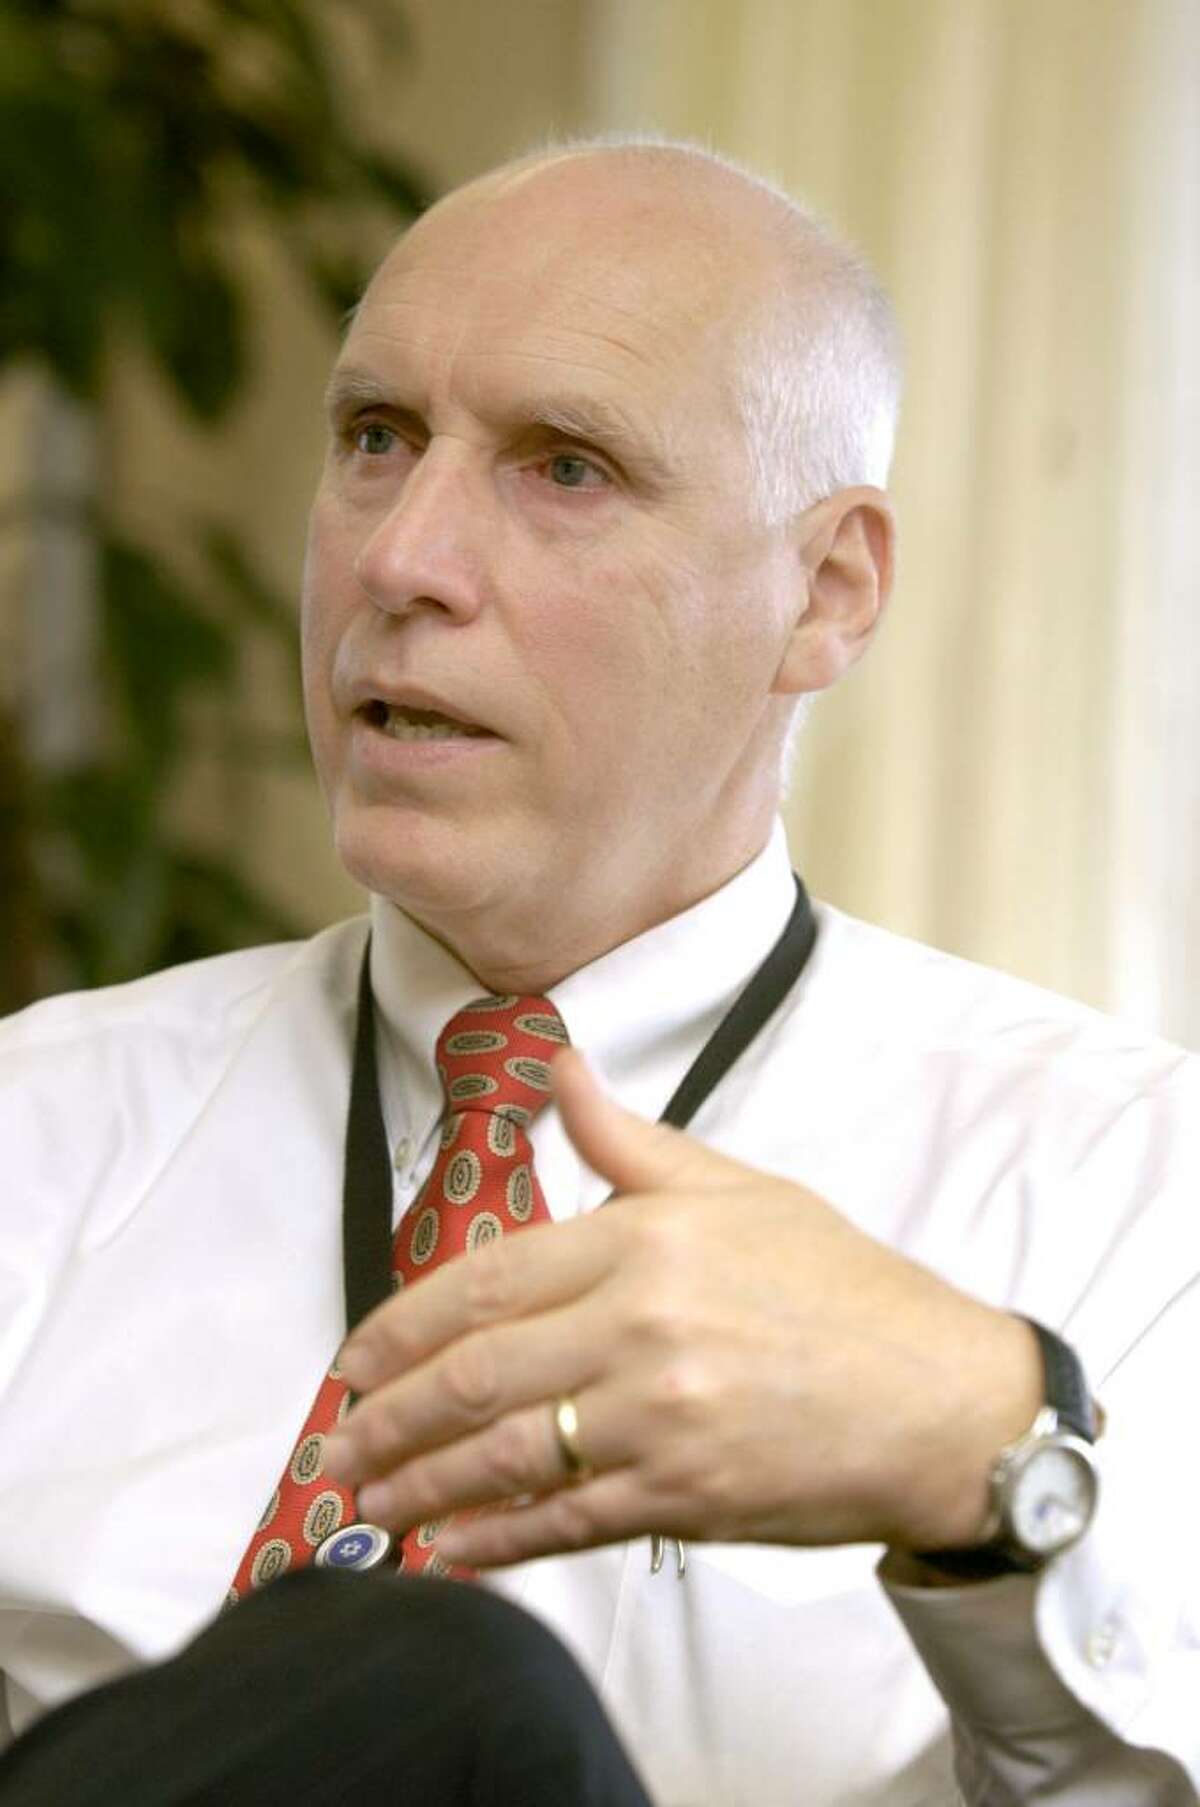 Frank Kelly, President of Danbury Hospital during an interview in his office Tuesday, Dec 8, 2009